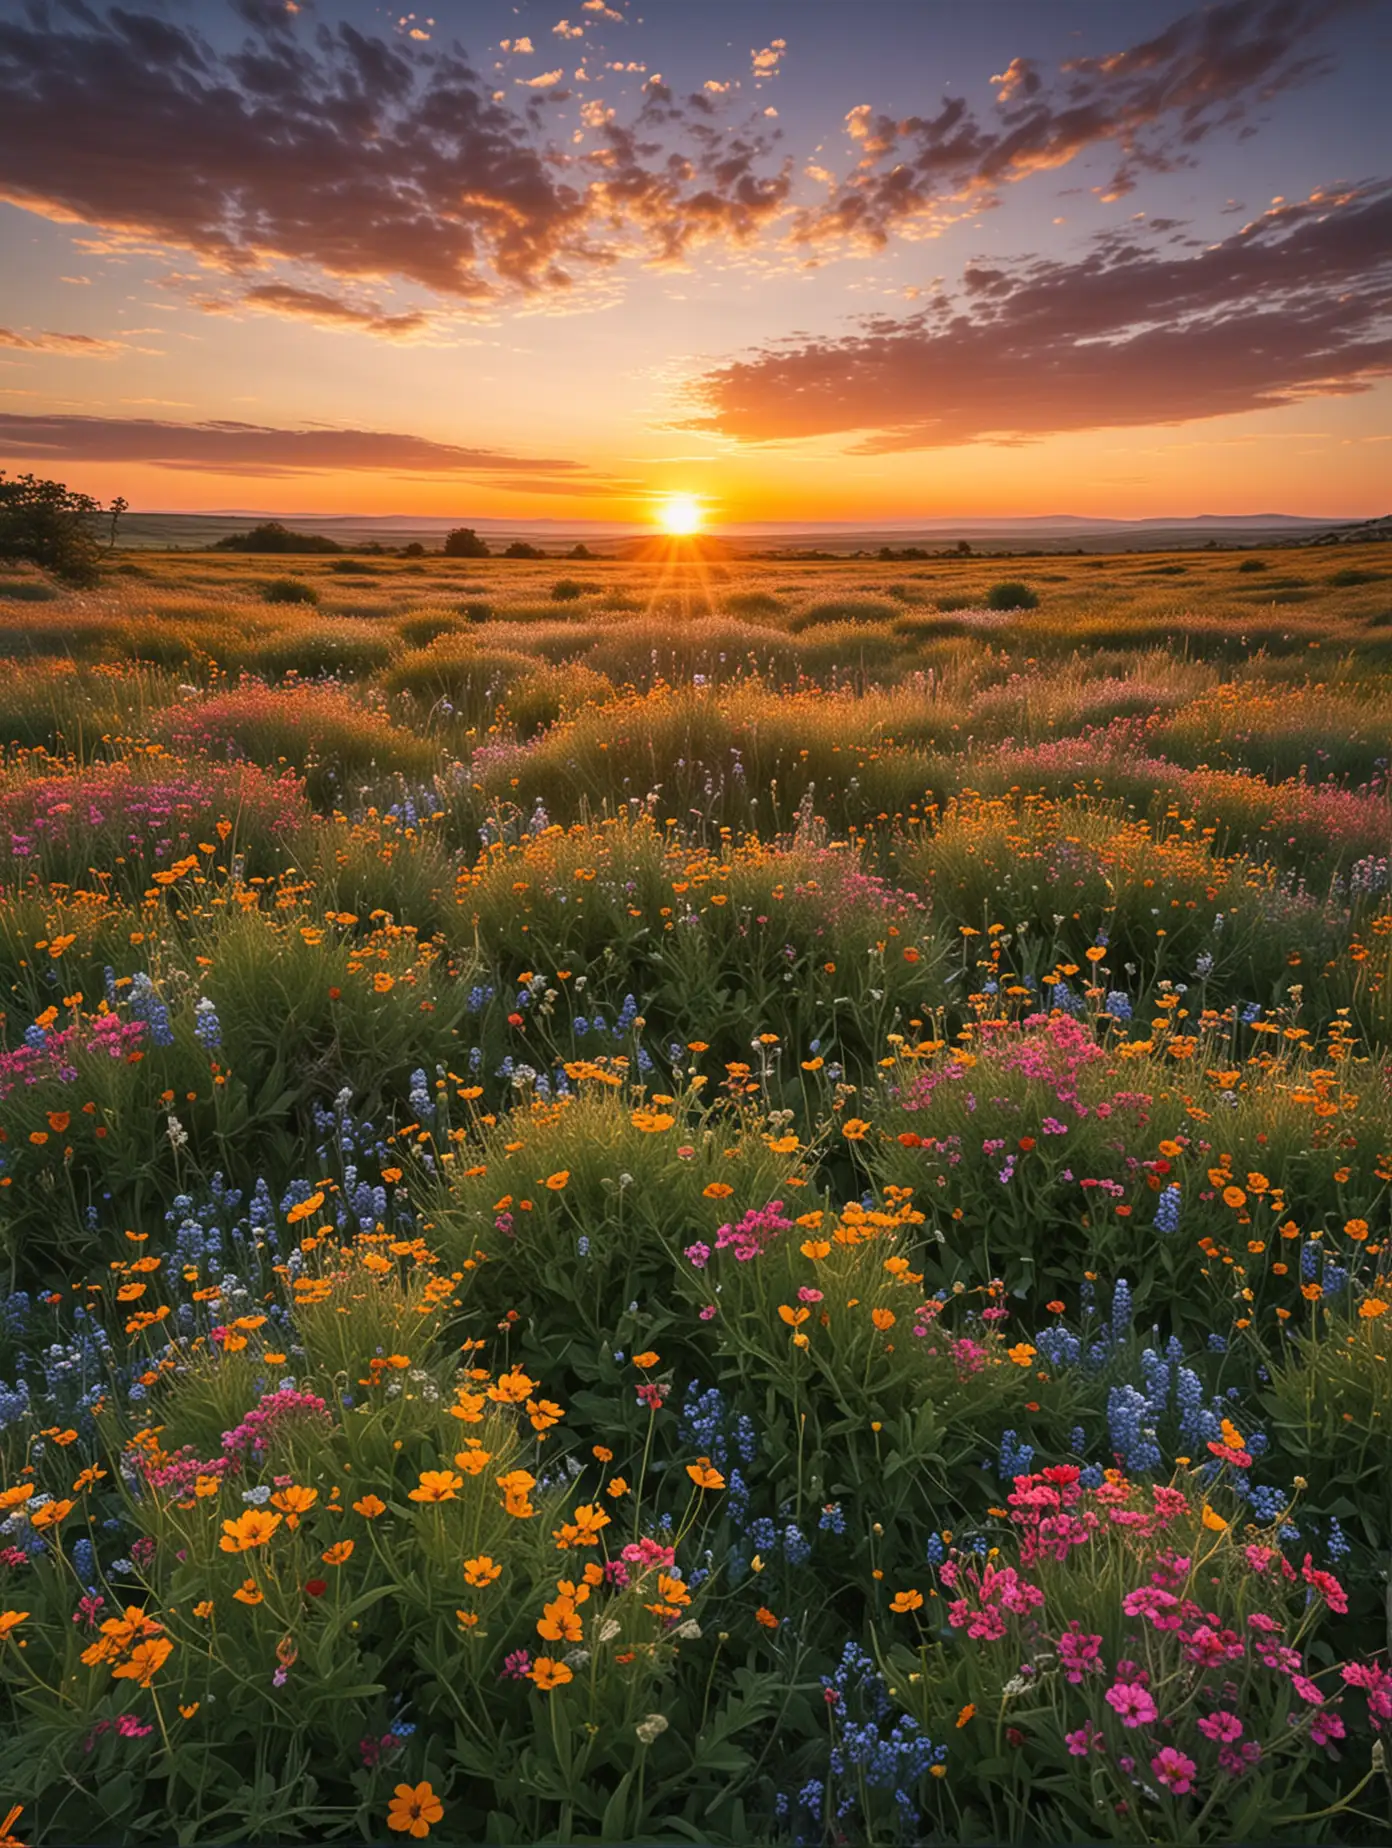 Serene Sunset Landscape with Wildflowers in Bloom